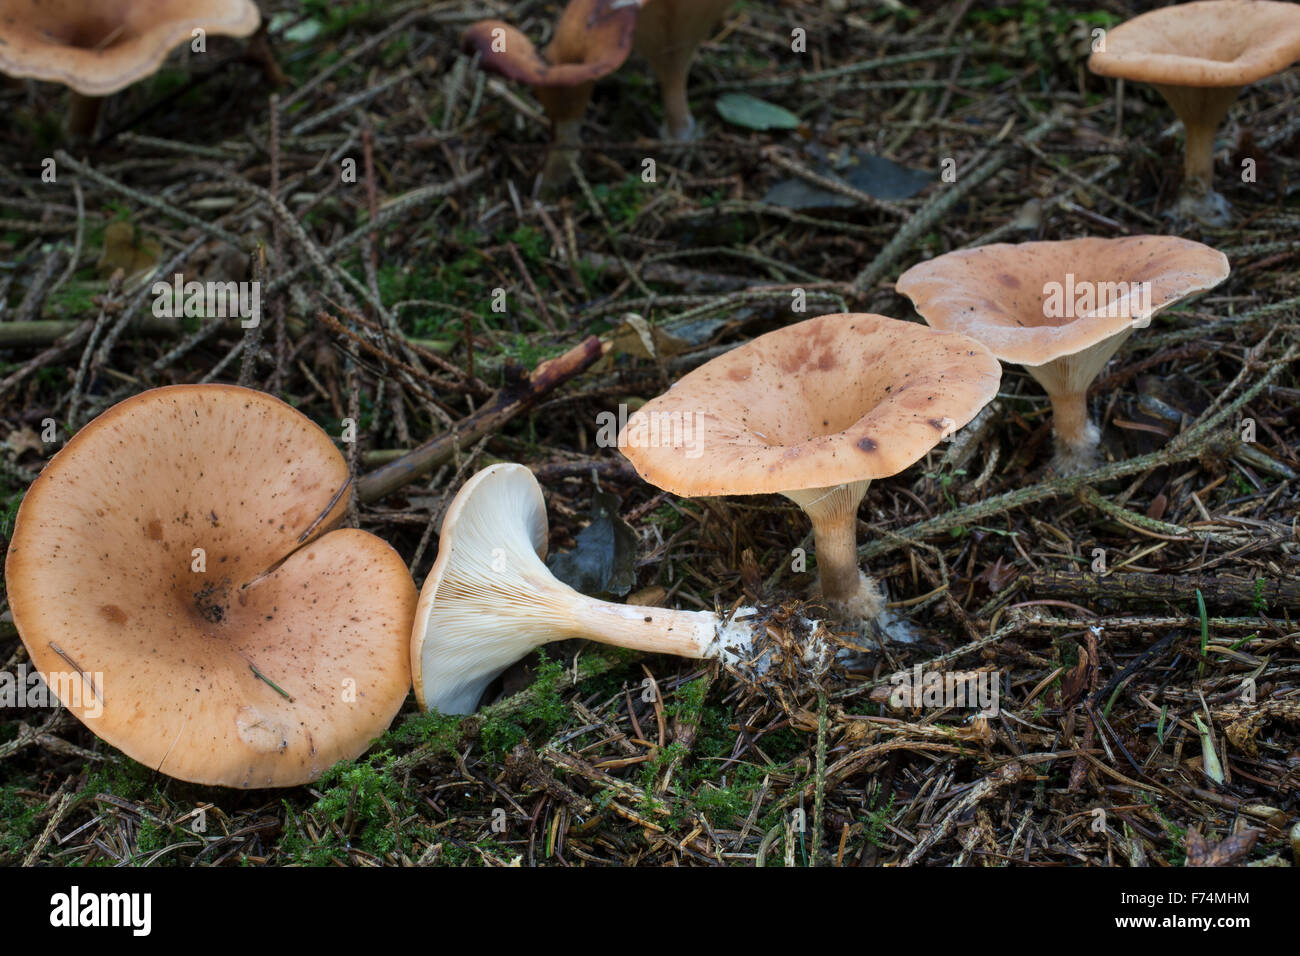 Tawny Funnel Cap, Fuchsiger Röteltrichterling, Fuchsiger Rötelritterling, Rötel-Trichterling, Lepista flaccida, Clitocybe Stock Photo